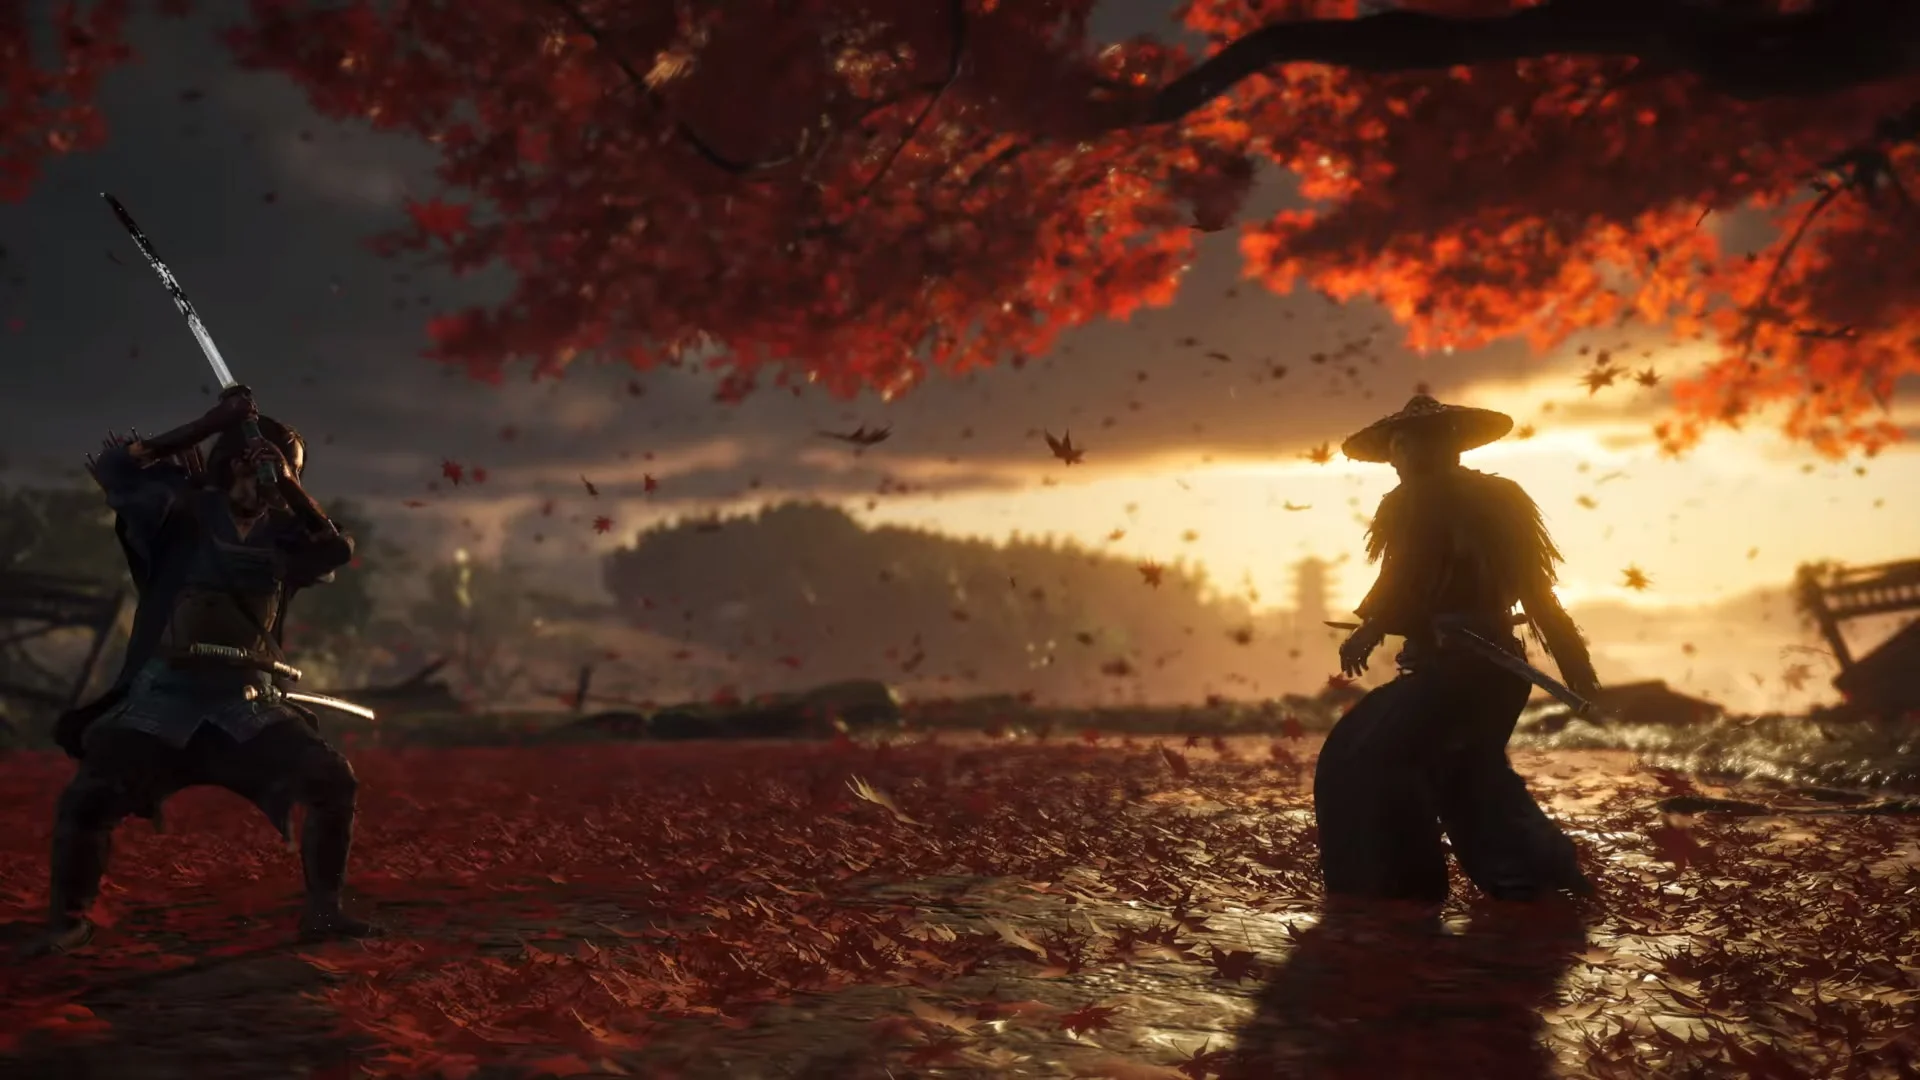 Ghost of Tsushima patch 1.05 adds Lethal difficulty and new text options